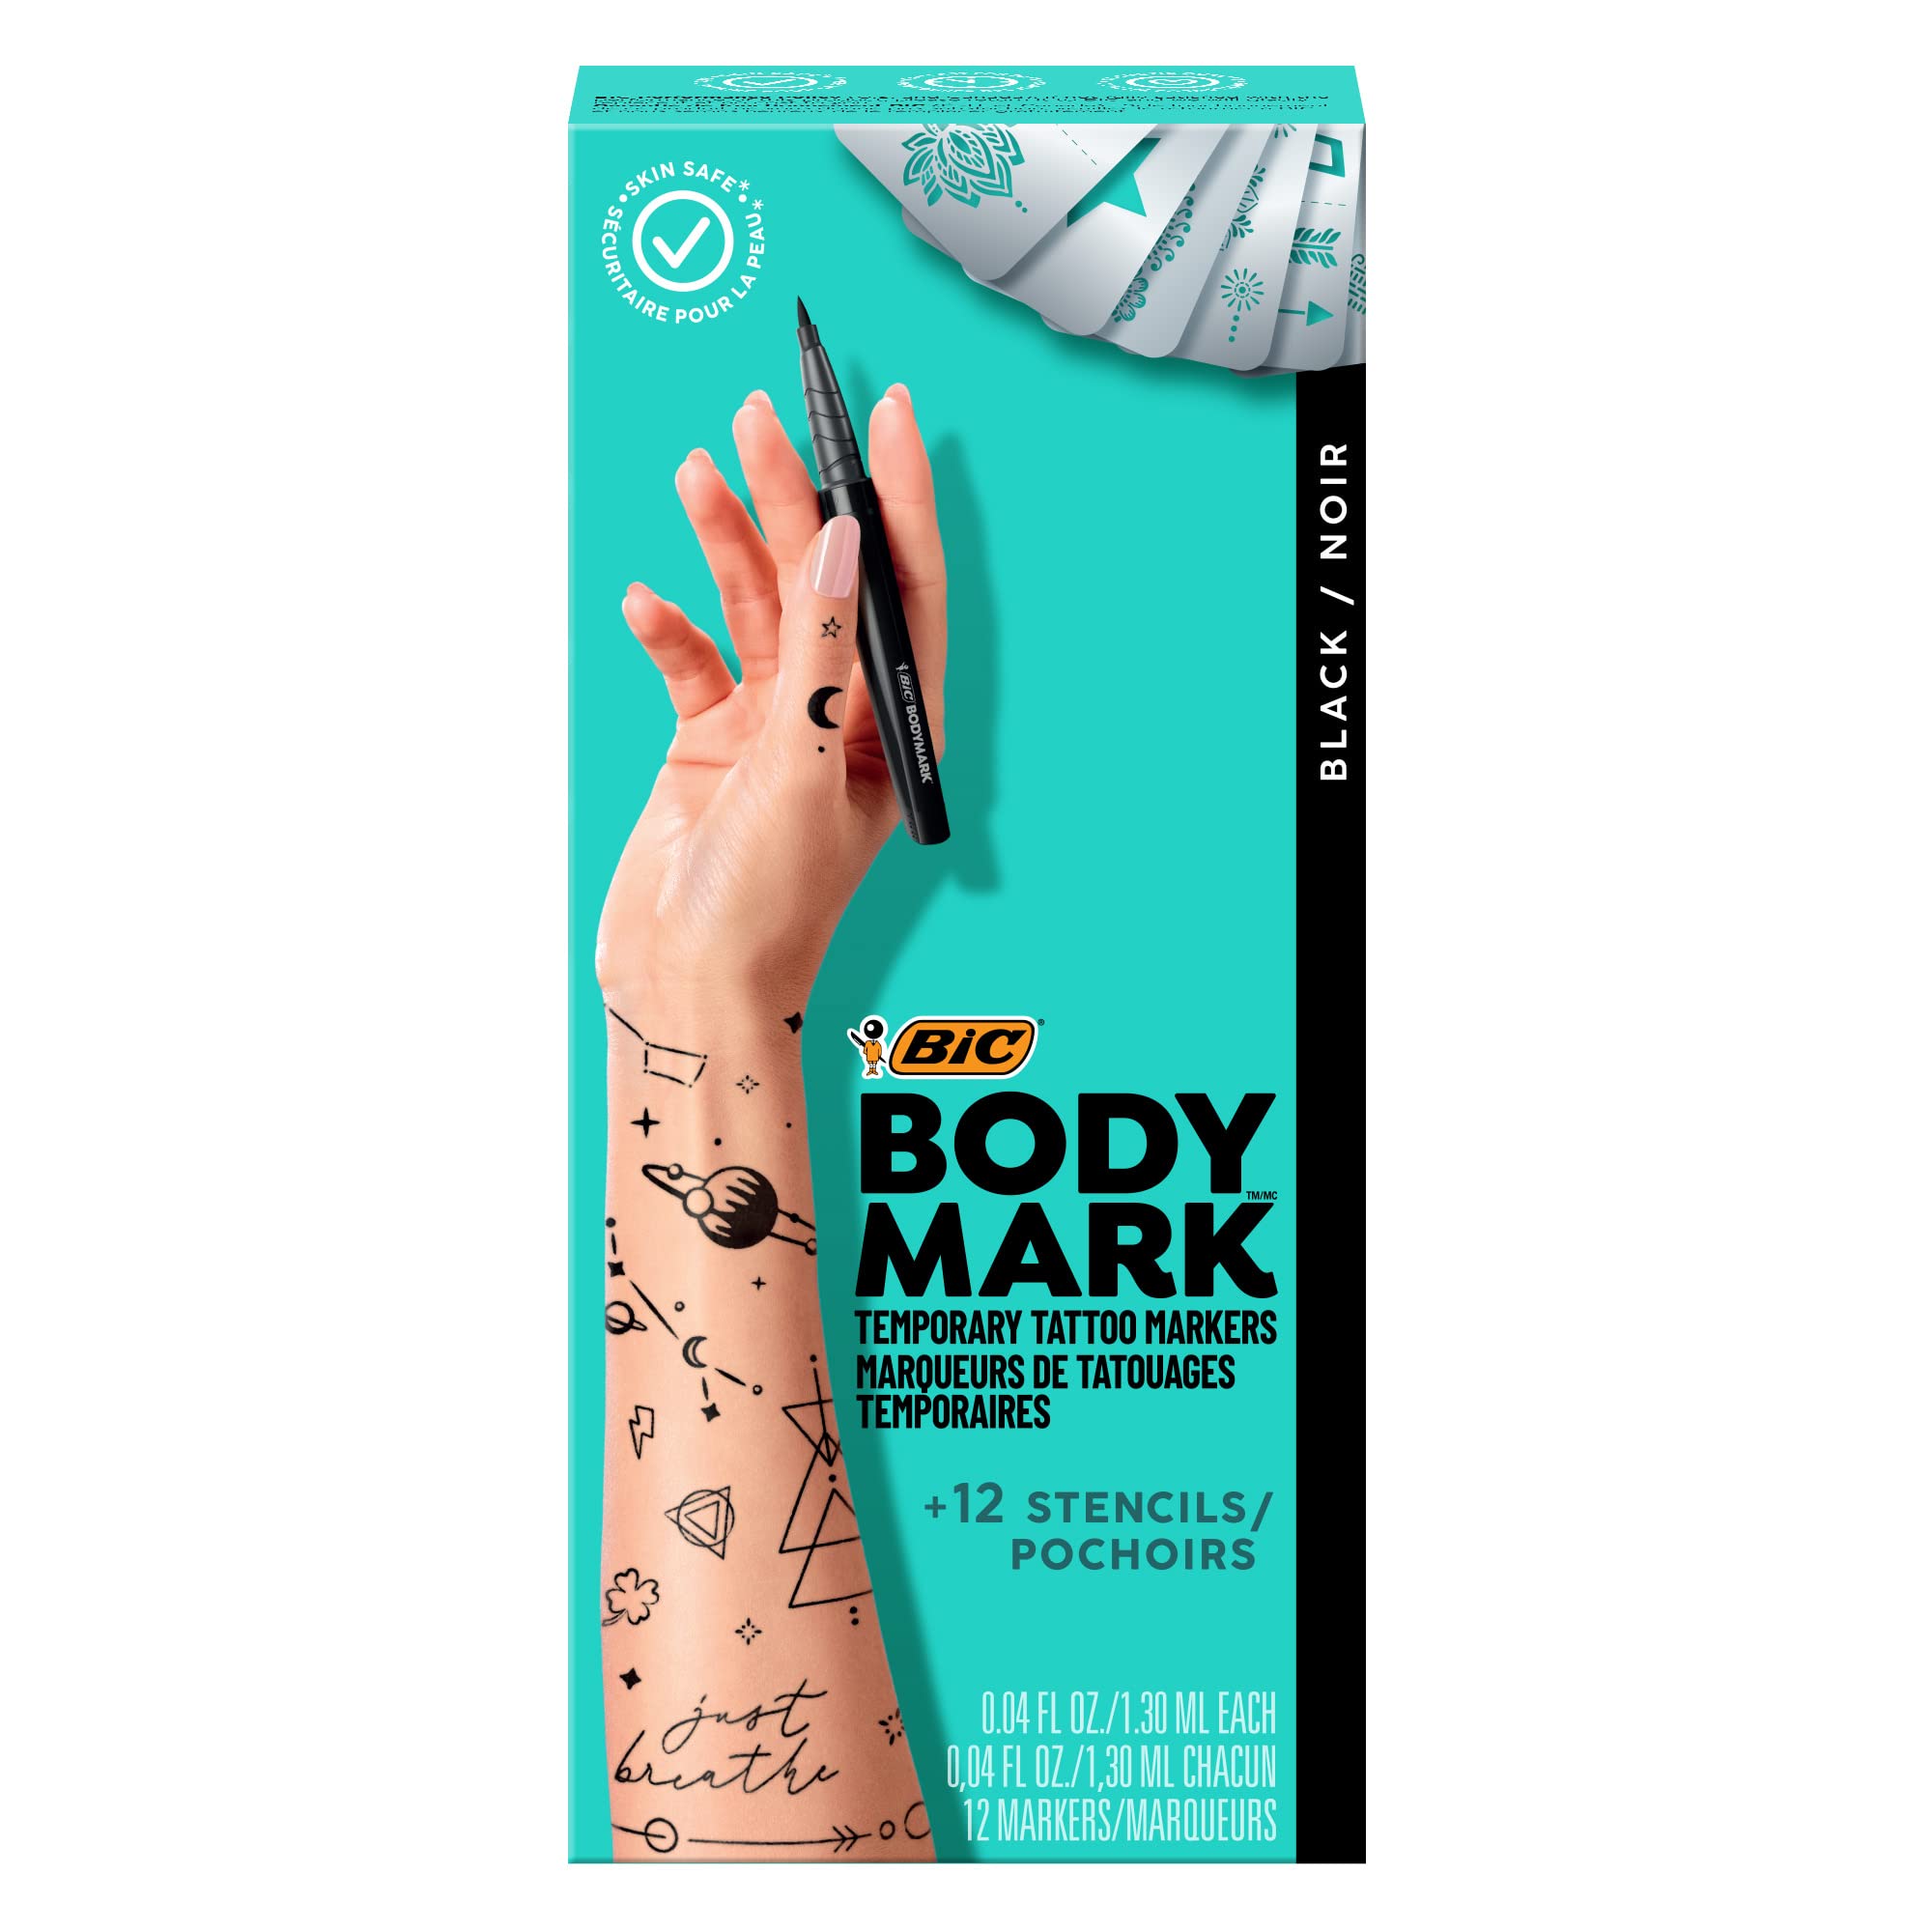 BIC BodyMark Temporary Tattoo Art Markers with Stencils, 6 Fine Black Markers, 6 Brush Tip Black Markers